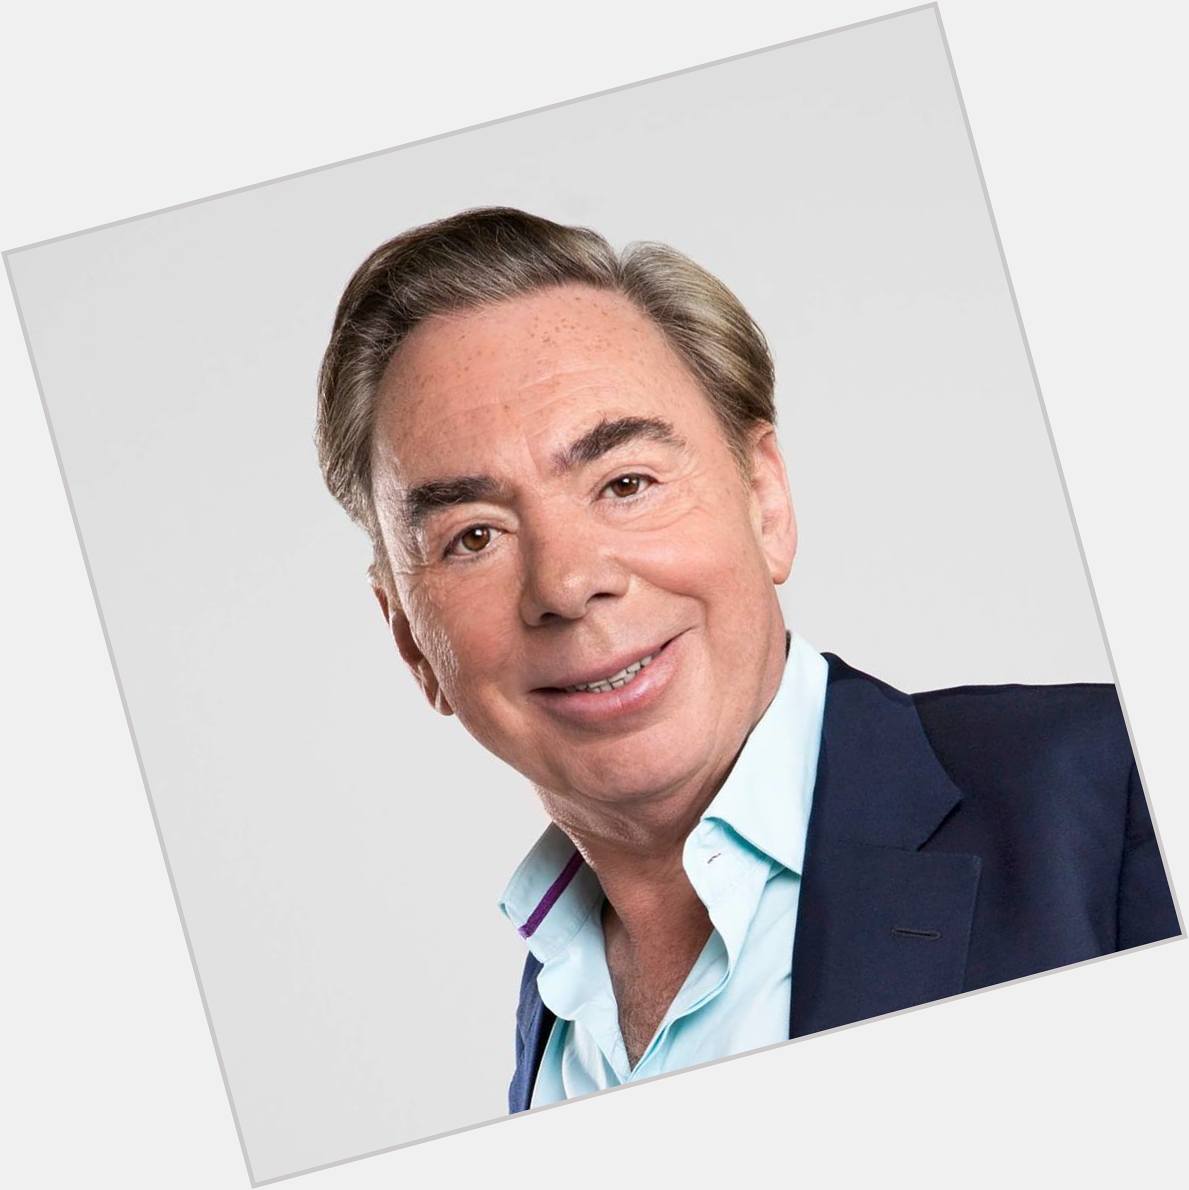  ON WITH Wishes:
Andrew Lloyd Webber A Happy Birthday! 